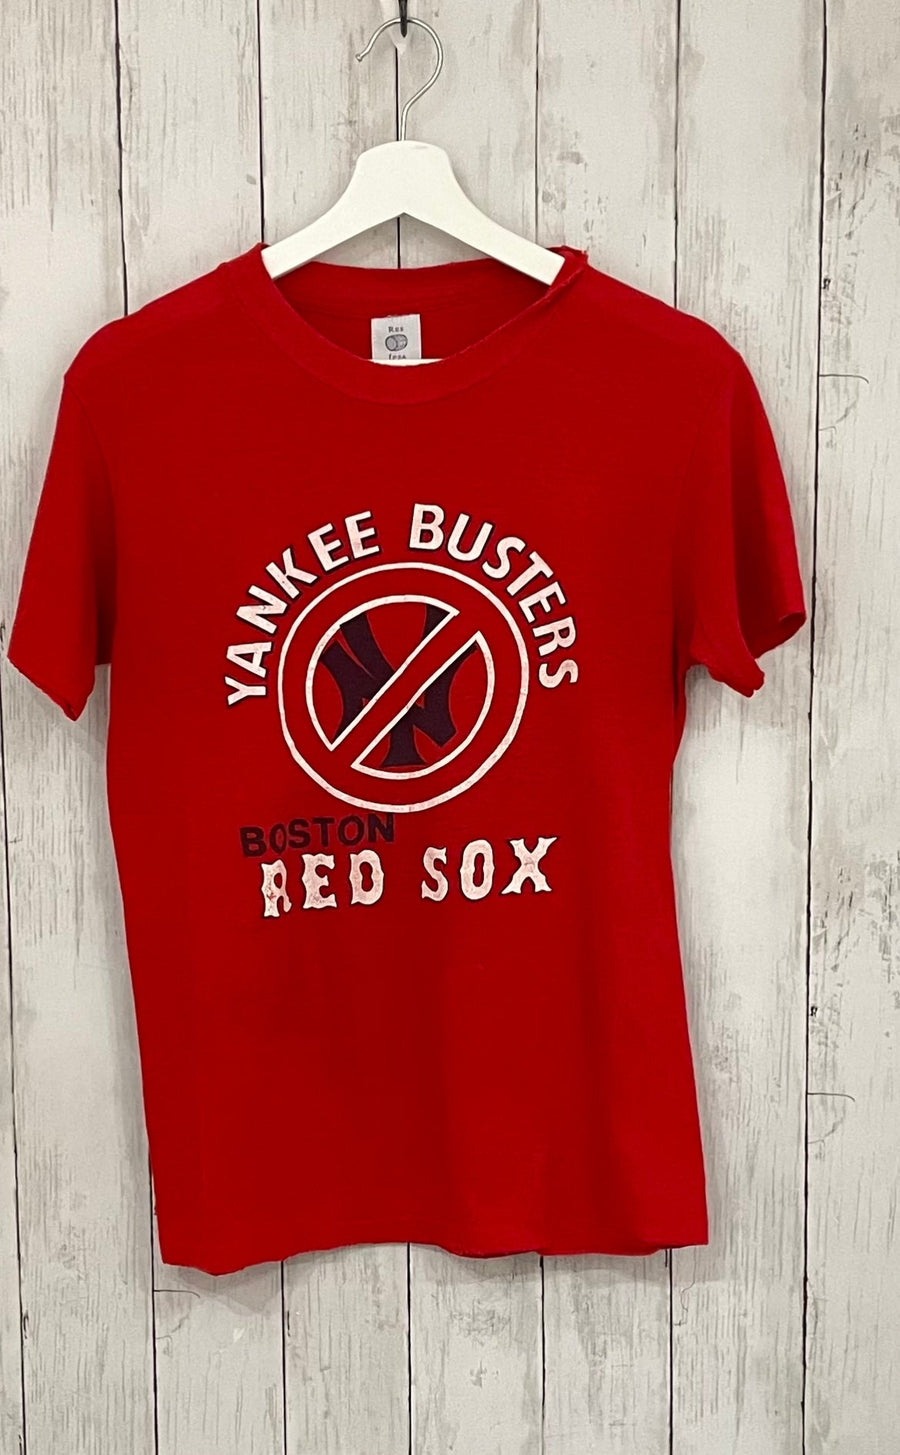 Vintage T-Shirt #6 Boston Red Sox 'Yankee Busters' - RES IPSA